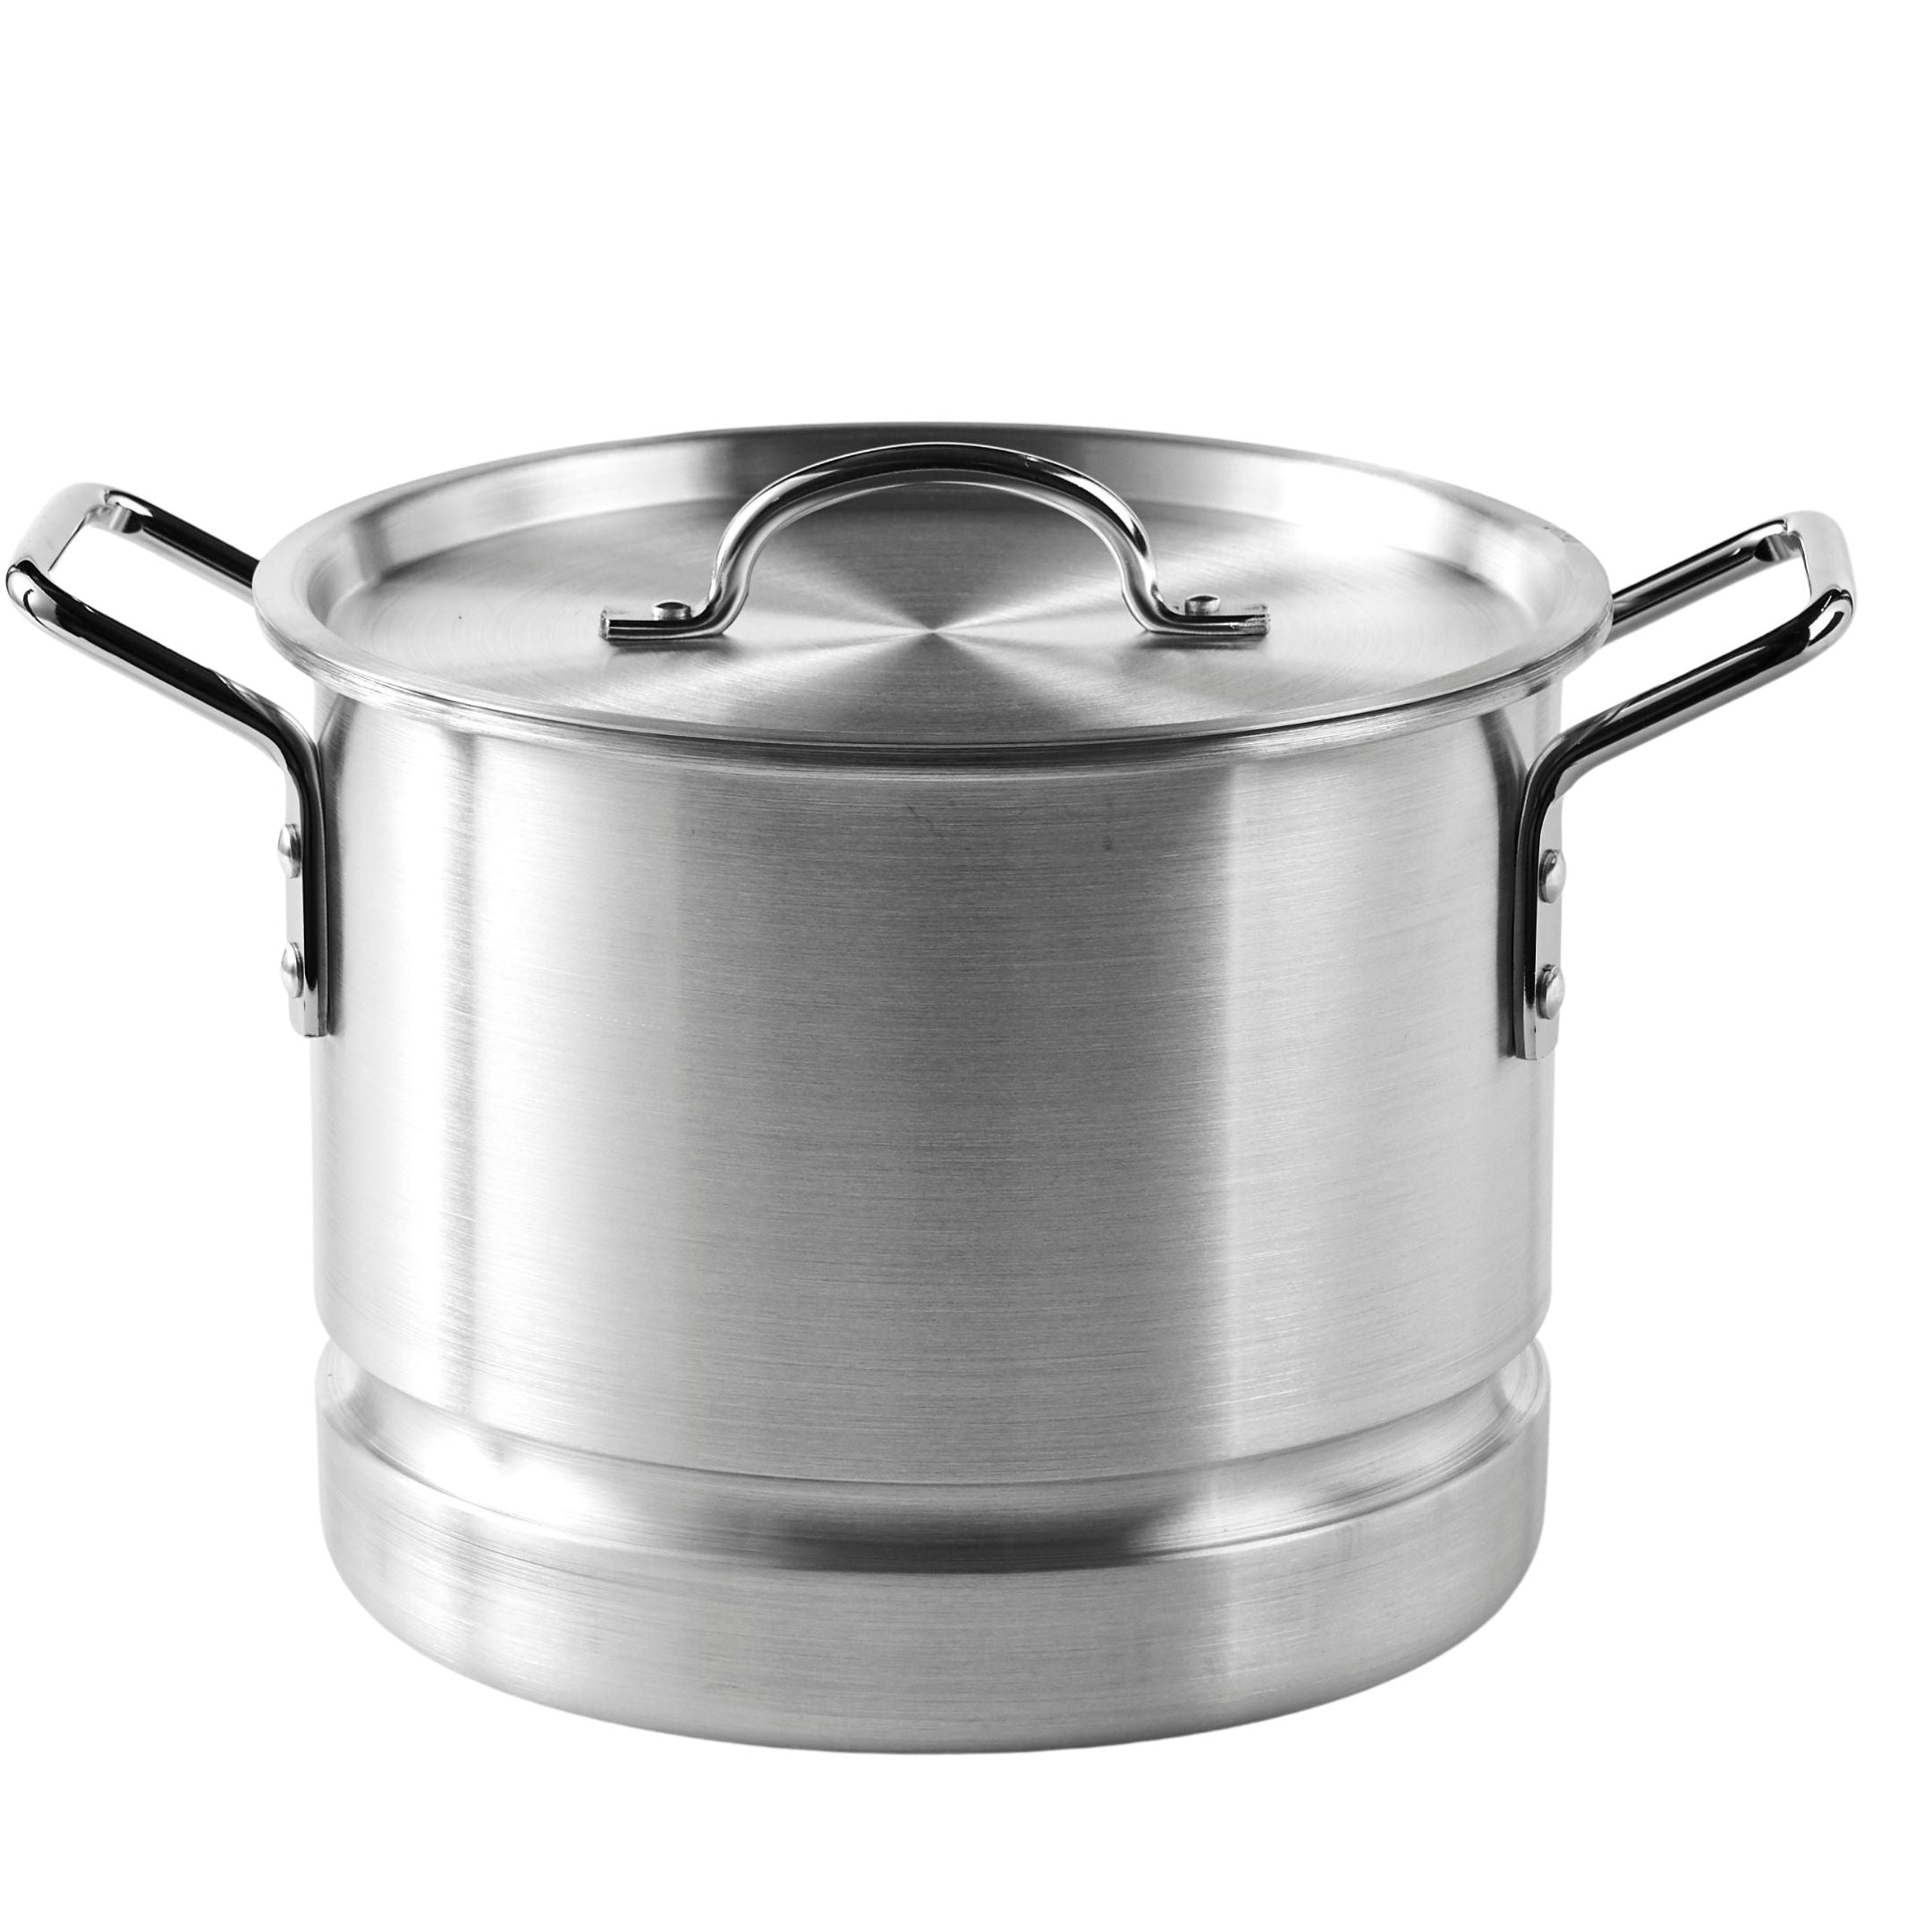 32 Quart Aluminum Stock/Steamer Pot Big Cooking Steaming Boiling Tamale,  Silver